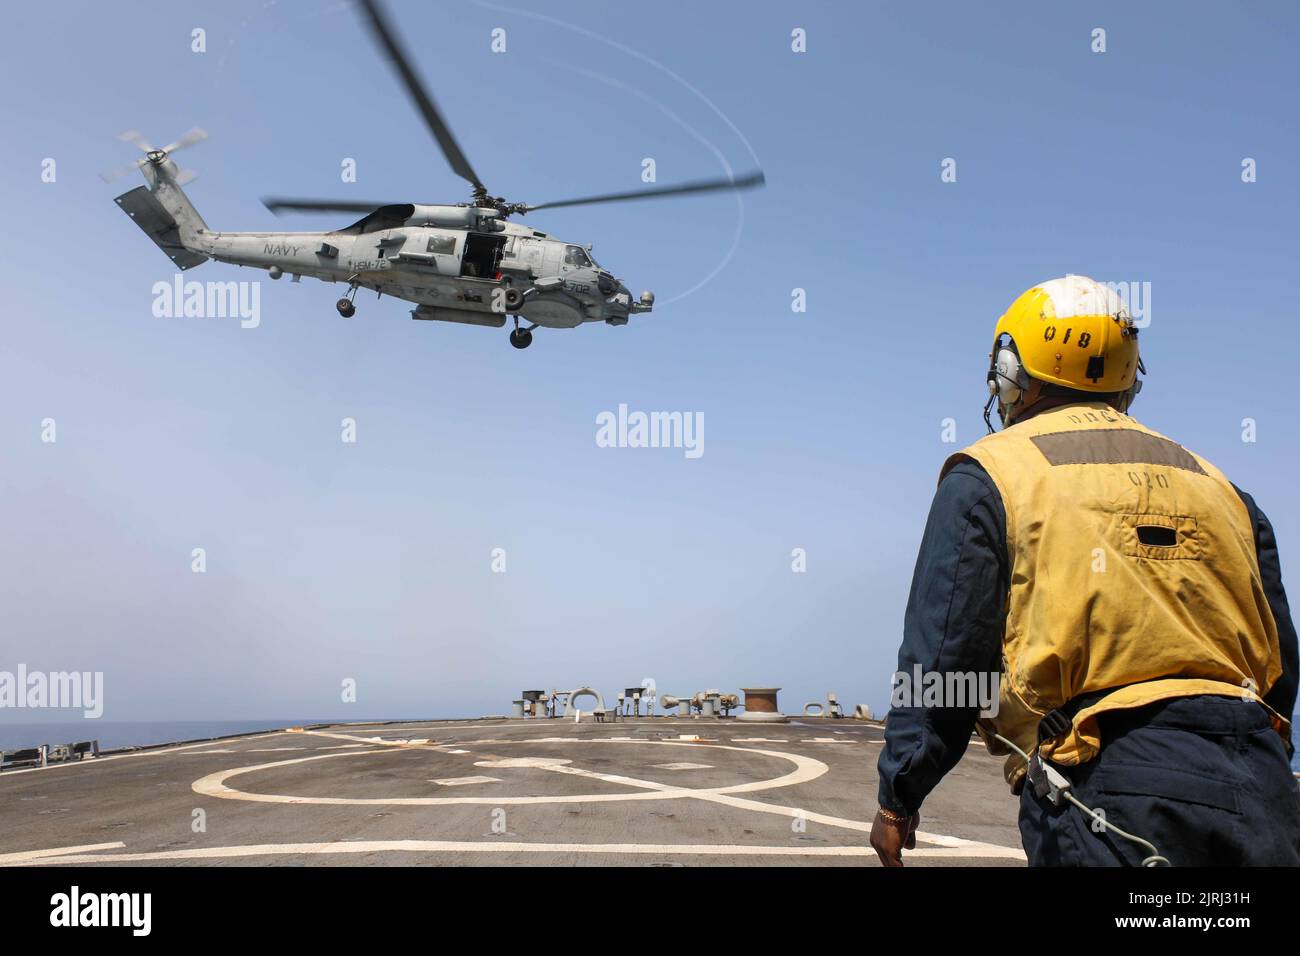 220818-N-CS075-1019 MEDITERRANEAN SEA (August, 18, 2022) Boatswain’s Mate 2nd Class Jerome Carlie, from Augusta, Georgia, signals to an MH-60S Seahawk helicopter, attached to the “Dragonslayers” of Helicopter Sea Combat Squadron (HSC) 11, aboard the Arleigh Burke-class guided-missile destroyer USS Cole (DDG 67) in the Mediterranean Sea, August 18, 2022. Cole is part of the Harry S. Truman Carrier Strike Group and is on a scheduled deployment in the U.S. Naval Forces Europe area of operations, employed by U.S. Sixth Fleet to defend U.S., allied and partner interests. (U.S. Navy Photo by Mass Co Stock Photo